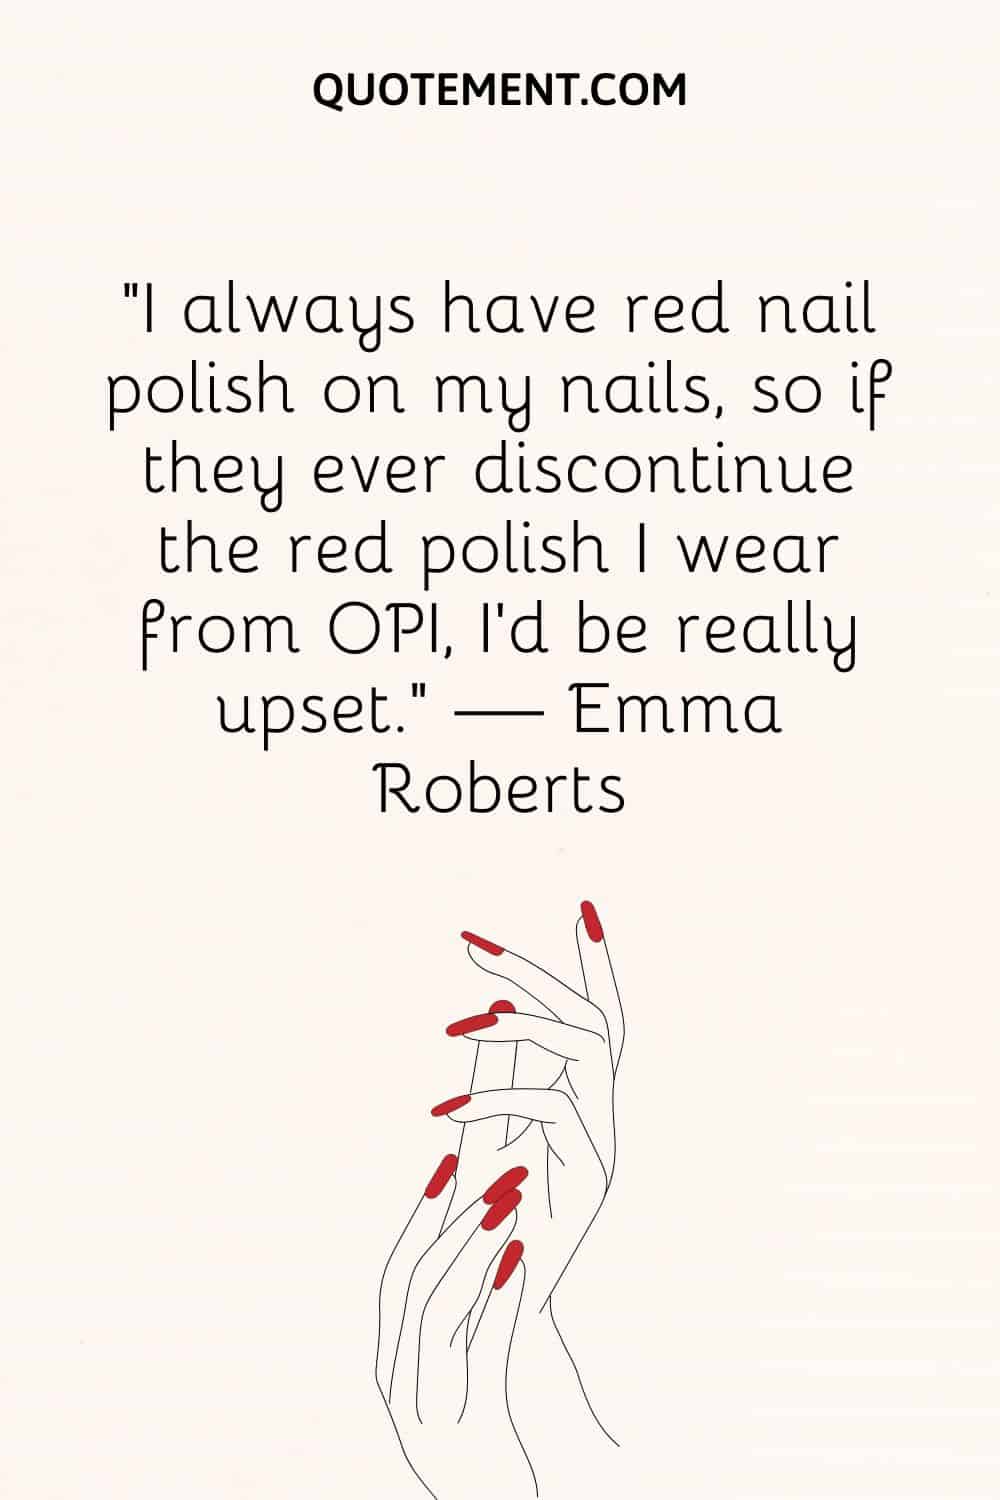 “I always have red nail polish on my nails, so if they ever discontinue the red polish I wear from OPI, I’d be really upset